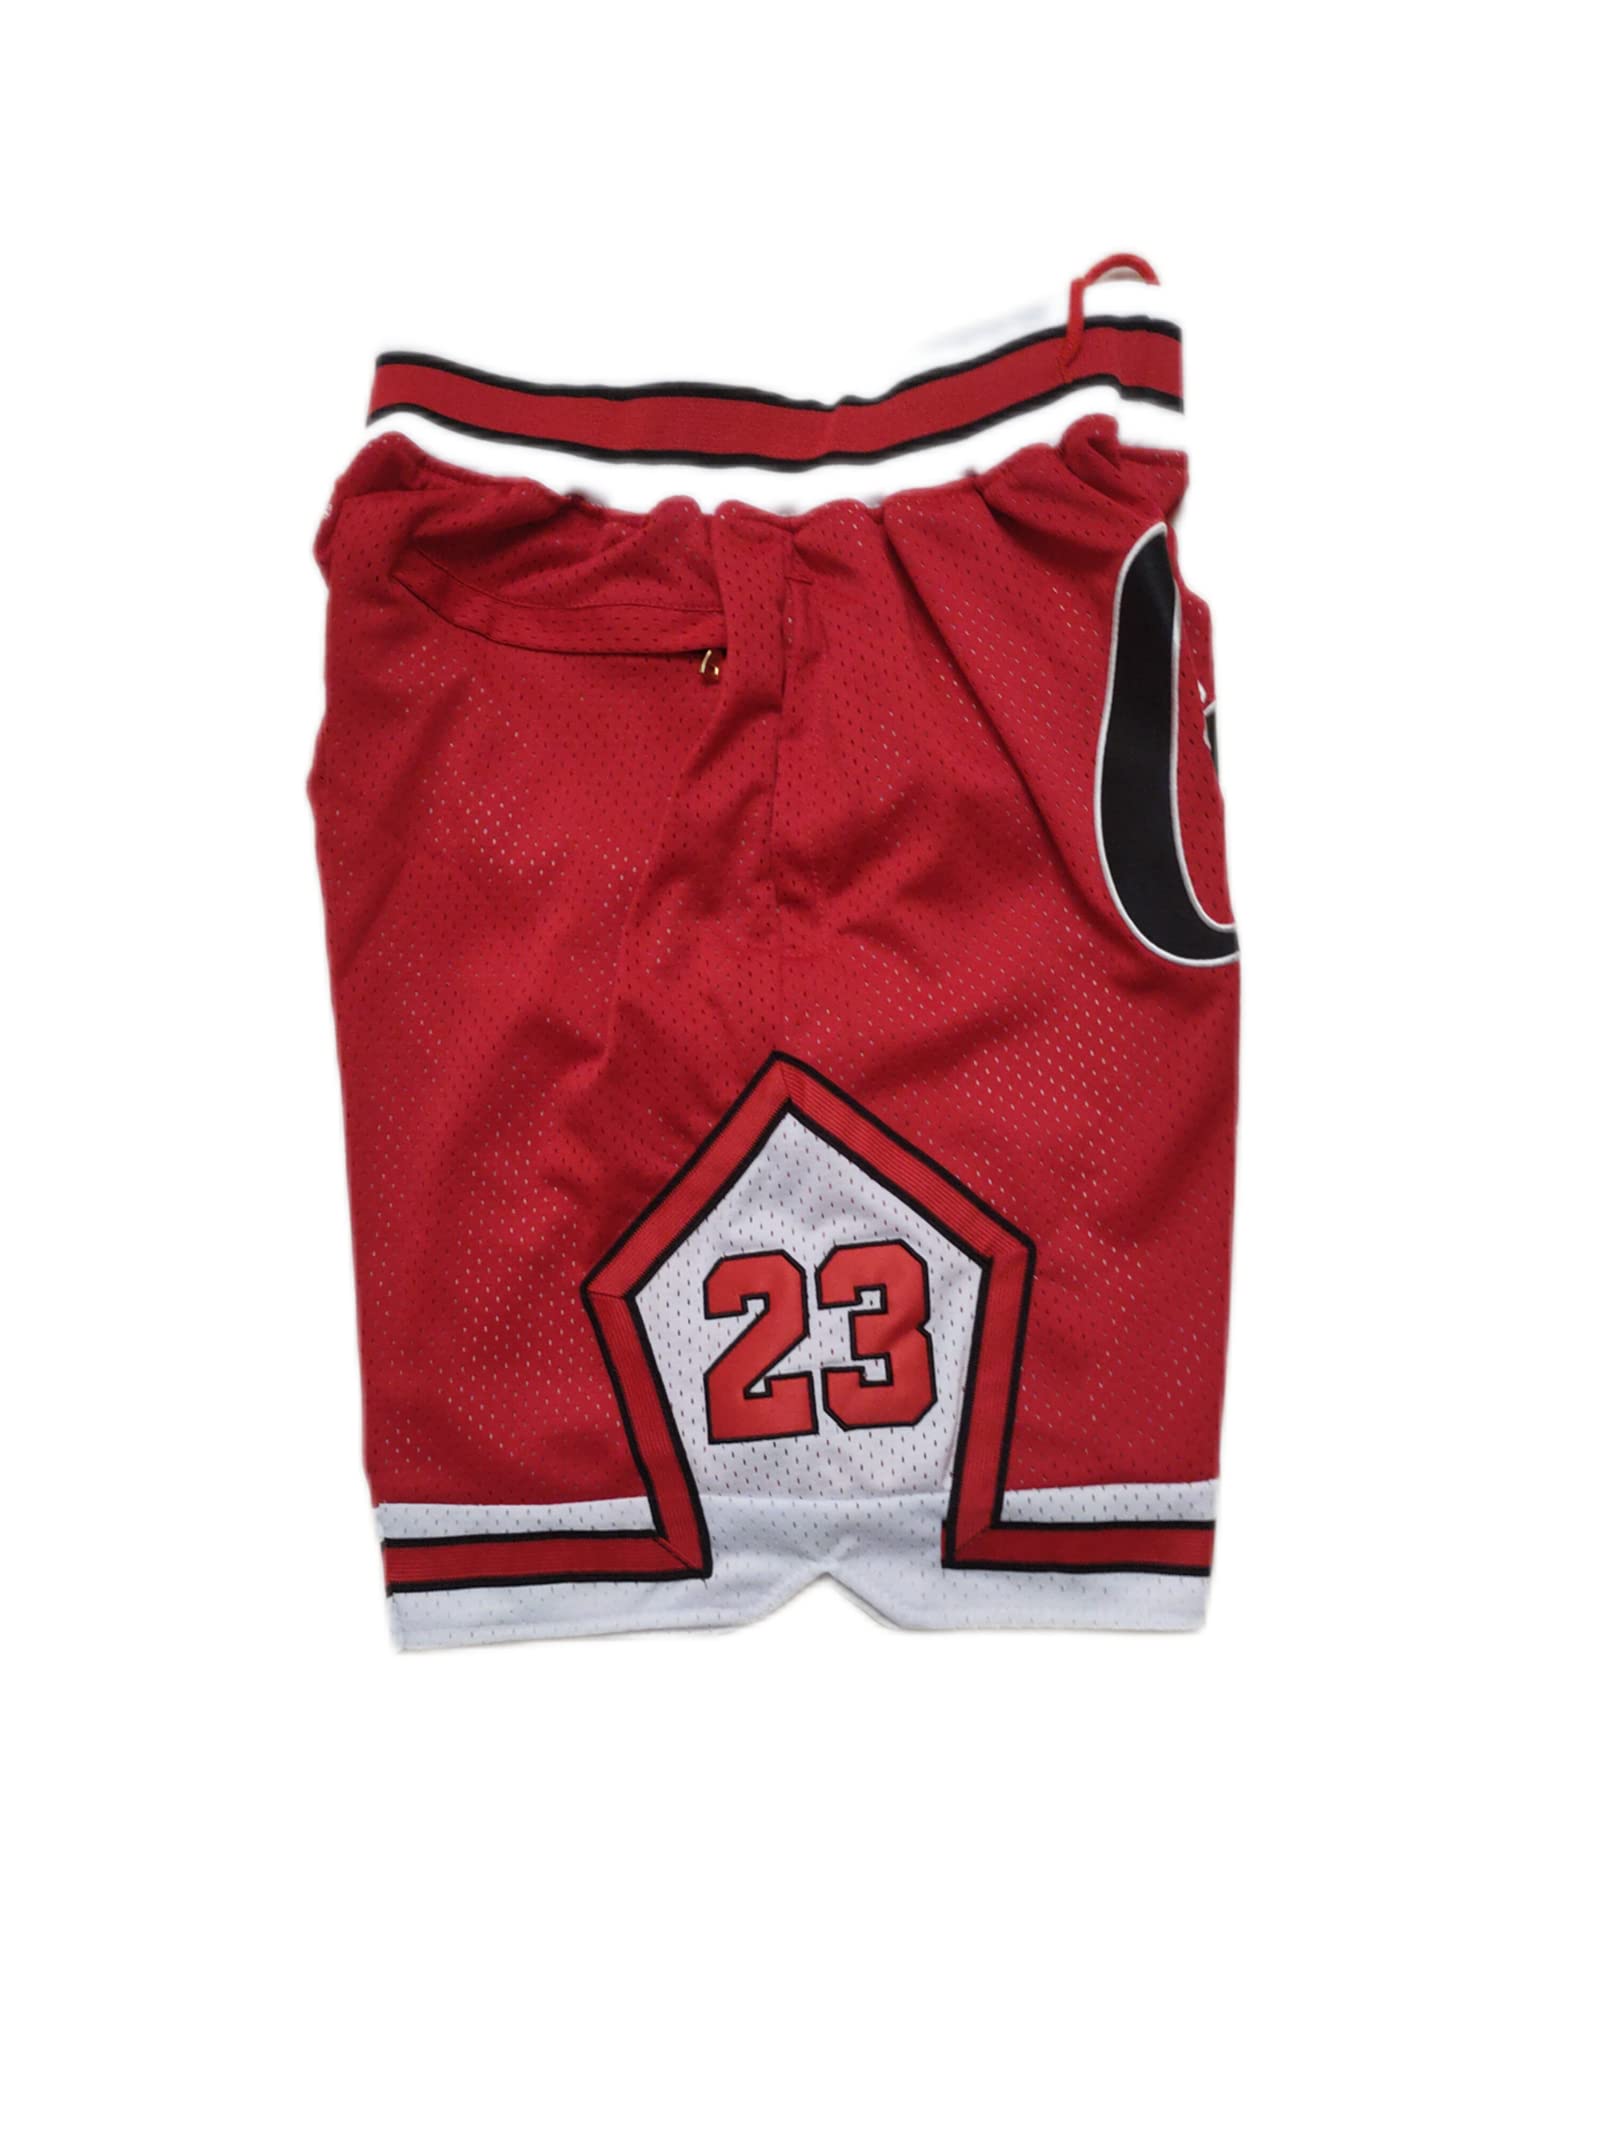 Basketball Shorts Mens,Fans Workout Gym Athletic Casual Shorts,Men Retro Mesh Embroidered with Pockets